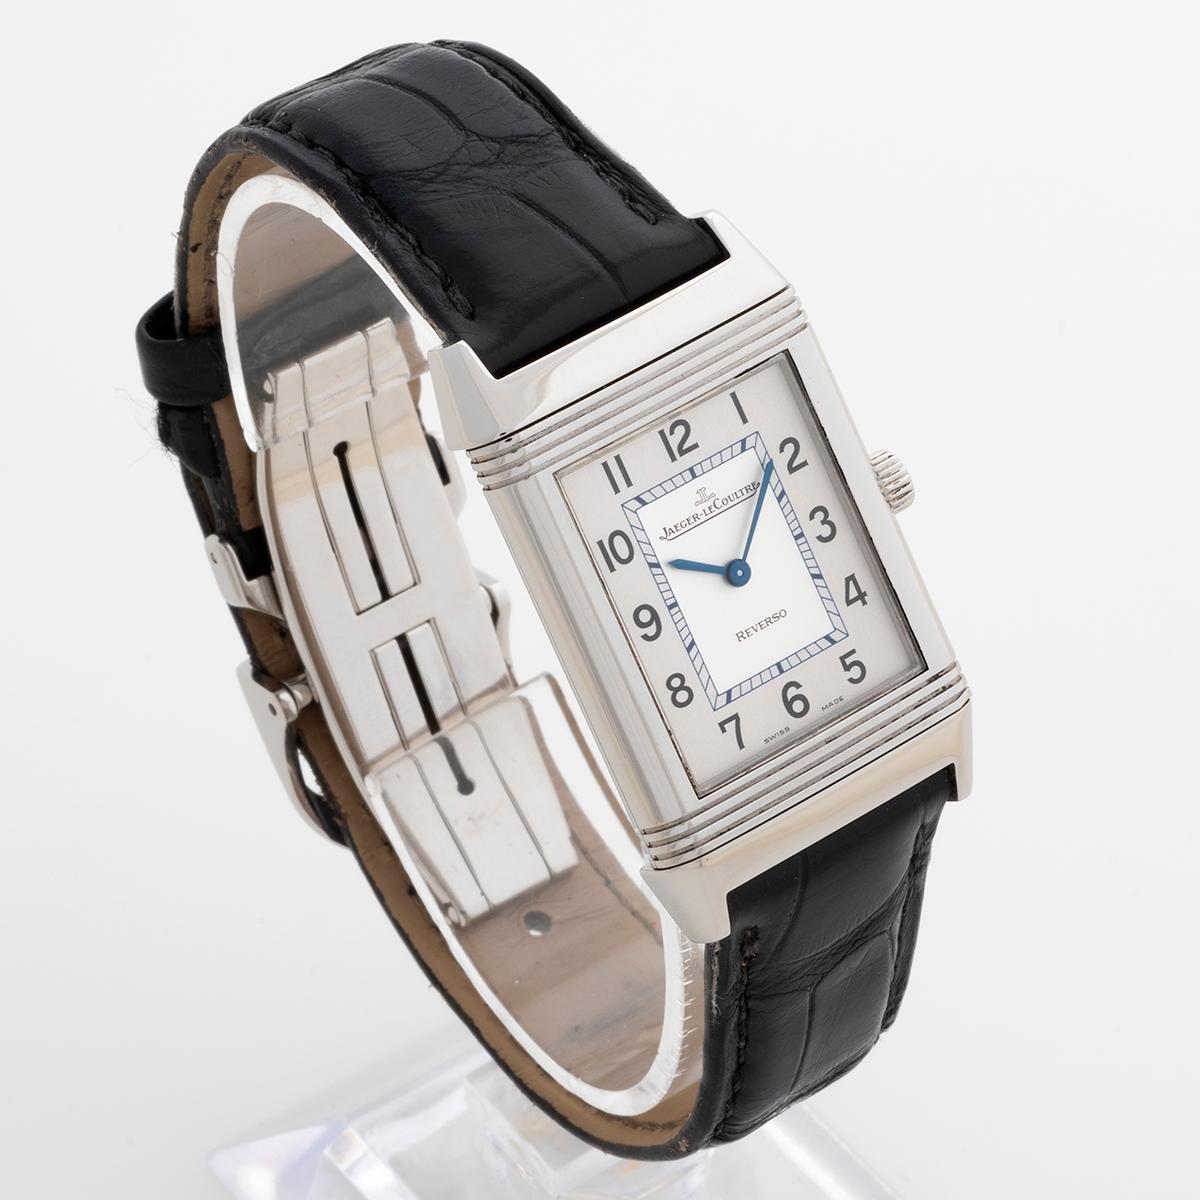 Our Jaeger-LeCoultre Reverso Classic reference 252.8.47 features a mid size 33 x 23mm case of stainless steel, quartz movement and its original black leather strap (with some wear) with deployant steel clasp. Presented in excellent condition with